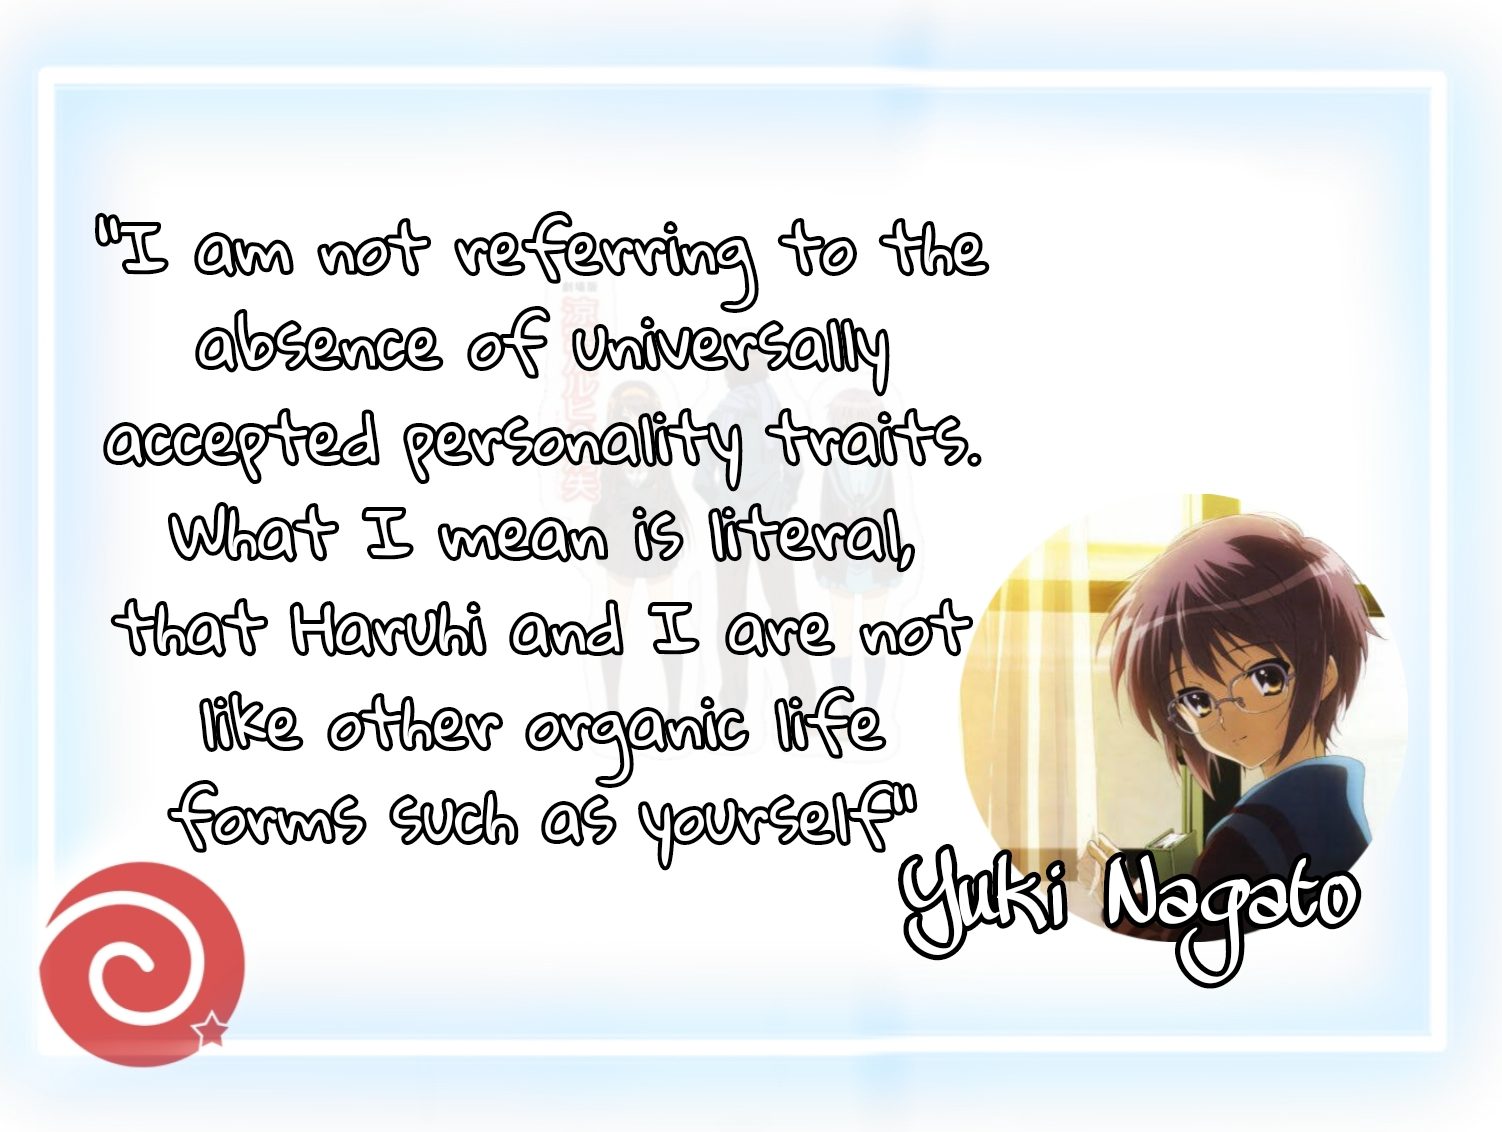 Quotes from The Melancholy of Haruhi Suzumiya